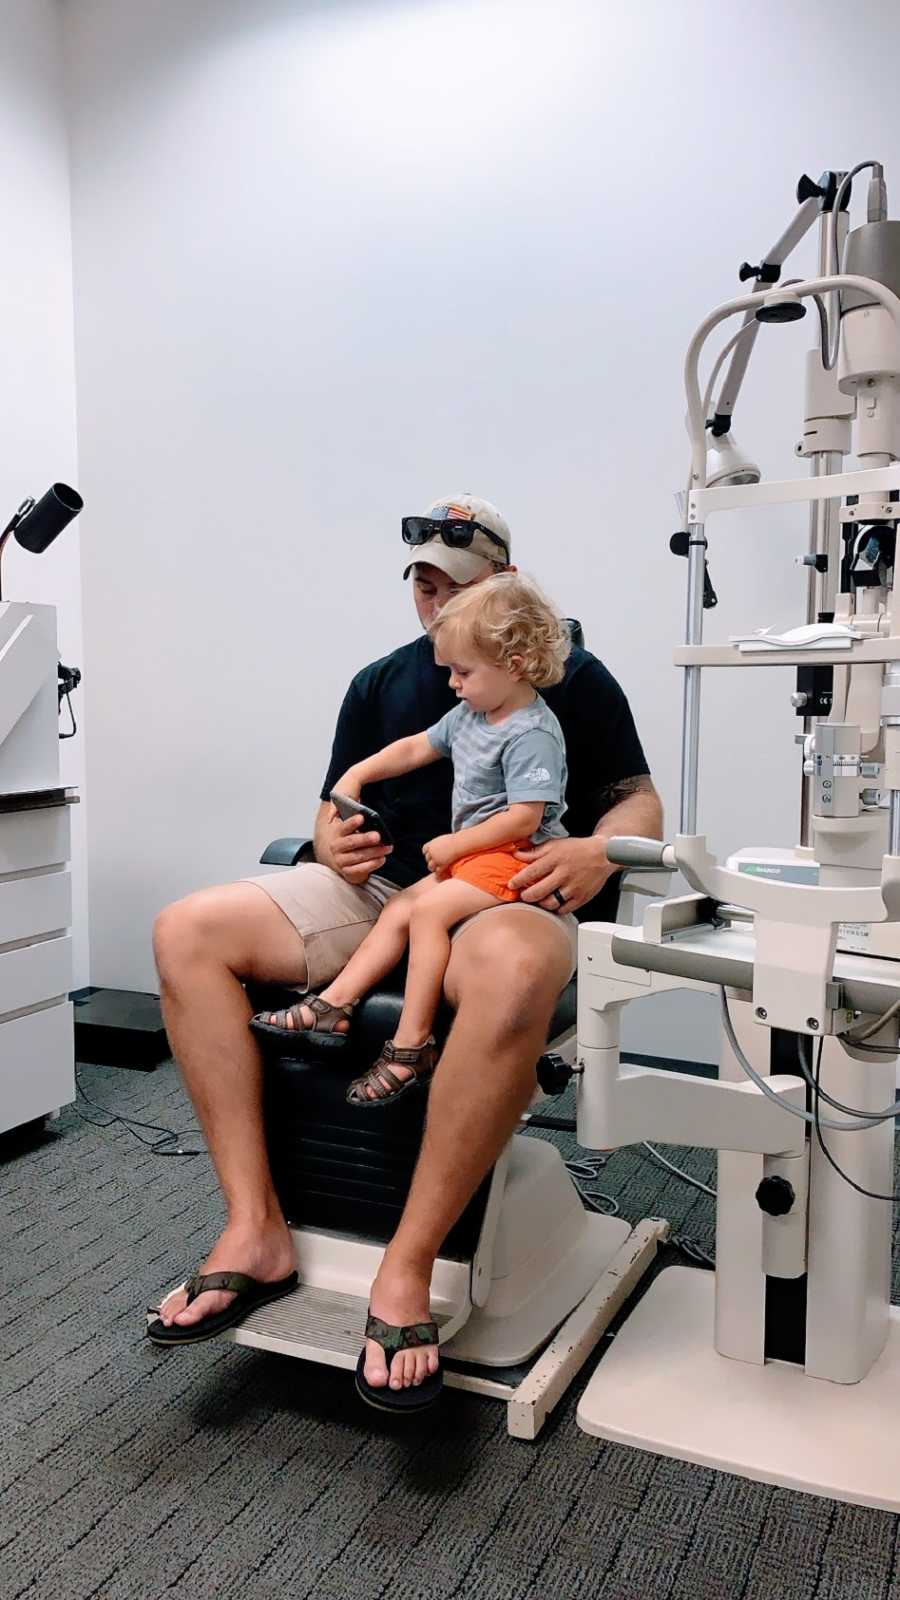 A little boy sits on his father's lap at a doctor's appointment